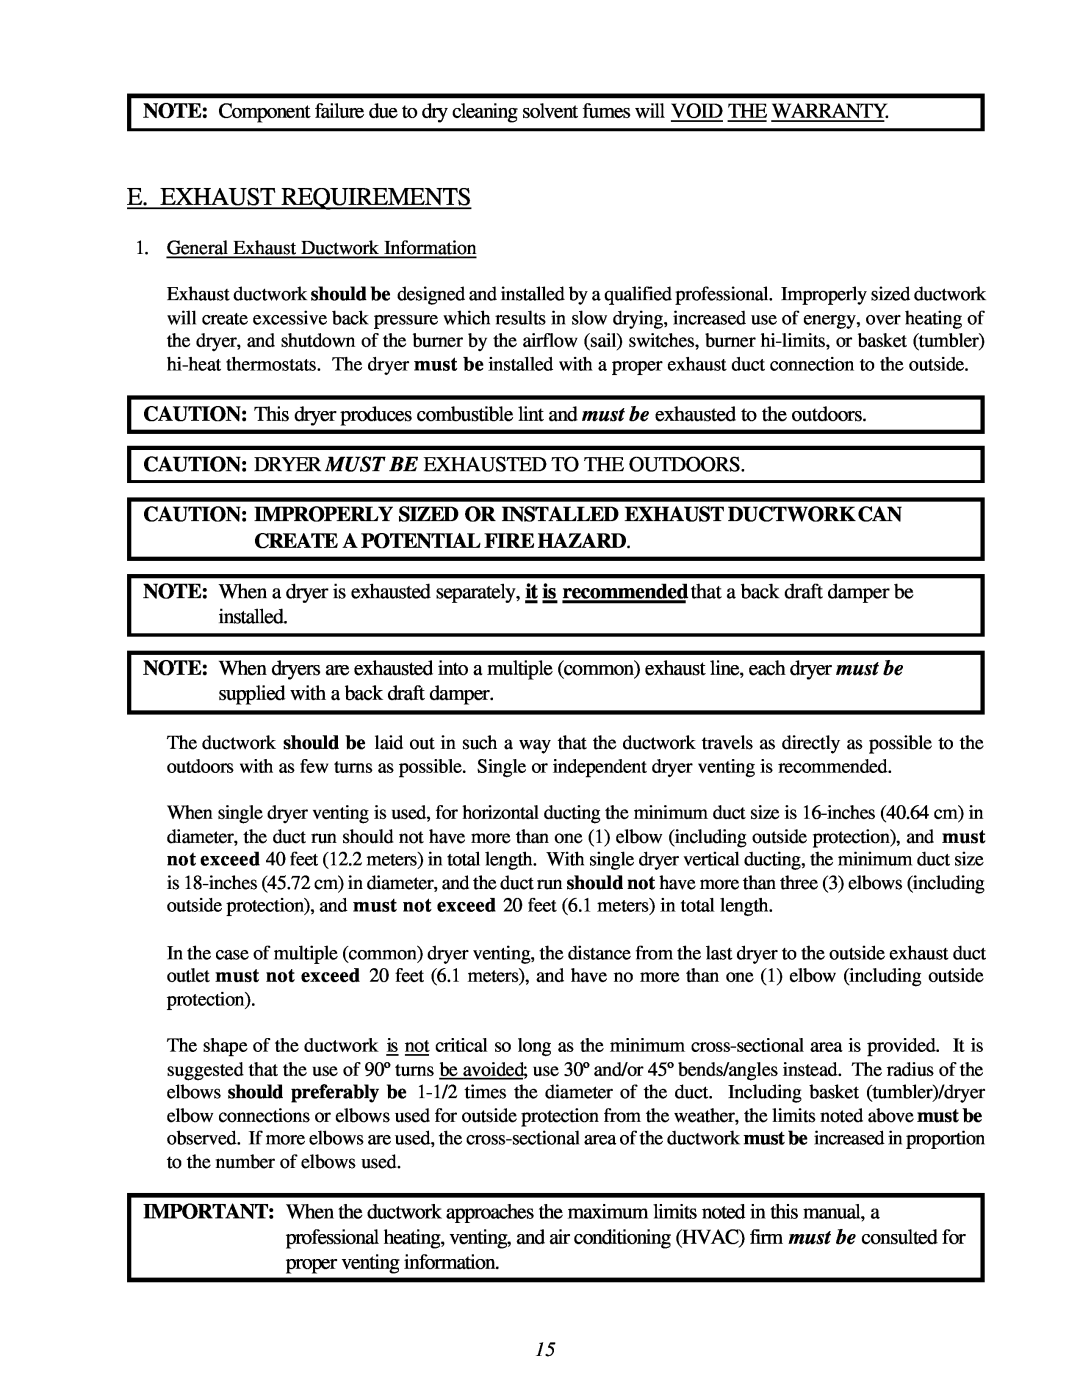 American Dryer Corp ML-122D installation manual E. Exhaust Requirements 